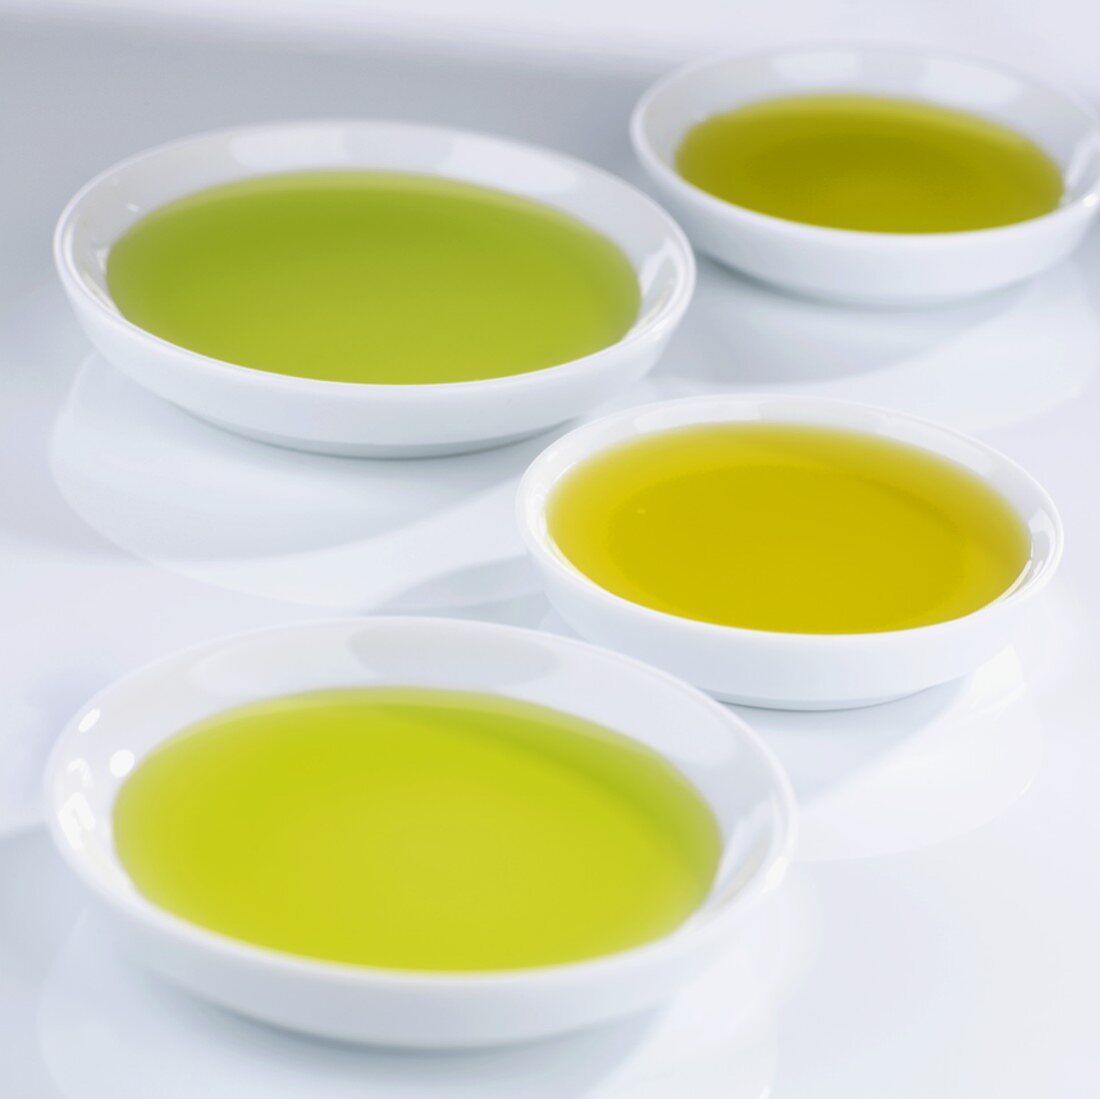 Small bowls of different kinds of olive oil